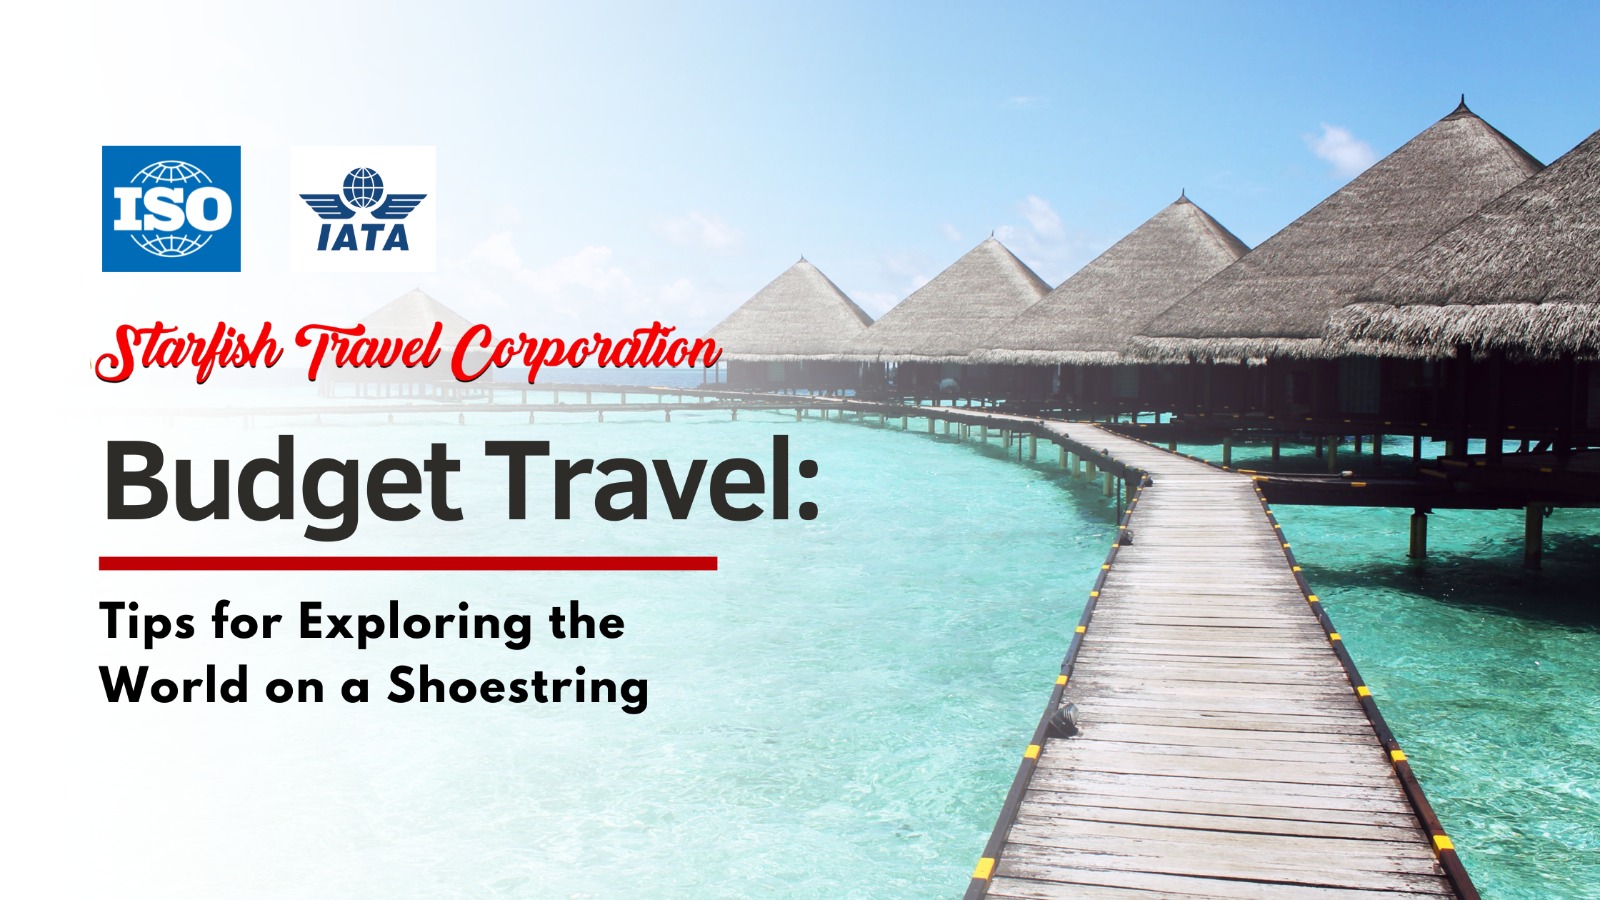 Budget Travel: Tips for Exploring the World on a Shoestring